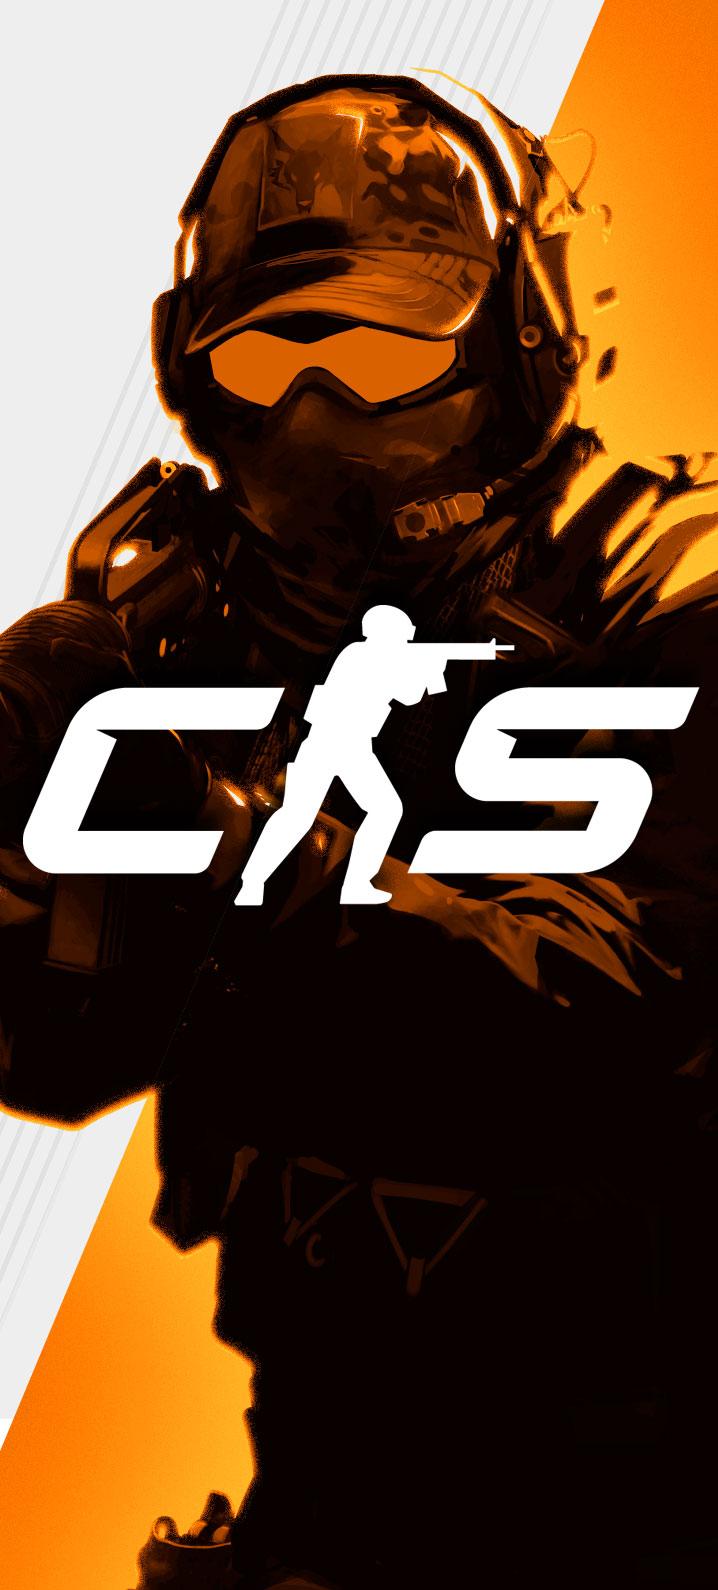 Counter-Strike 2 players furious about servers